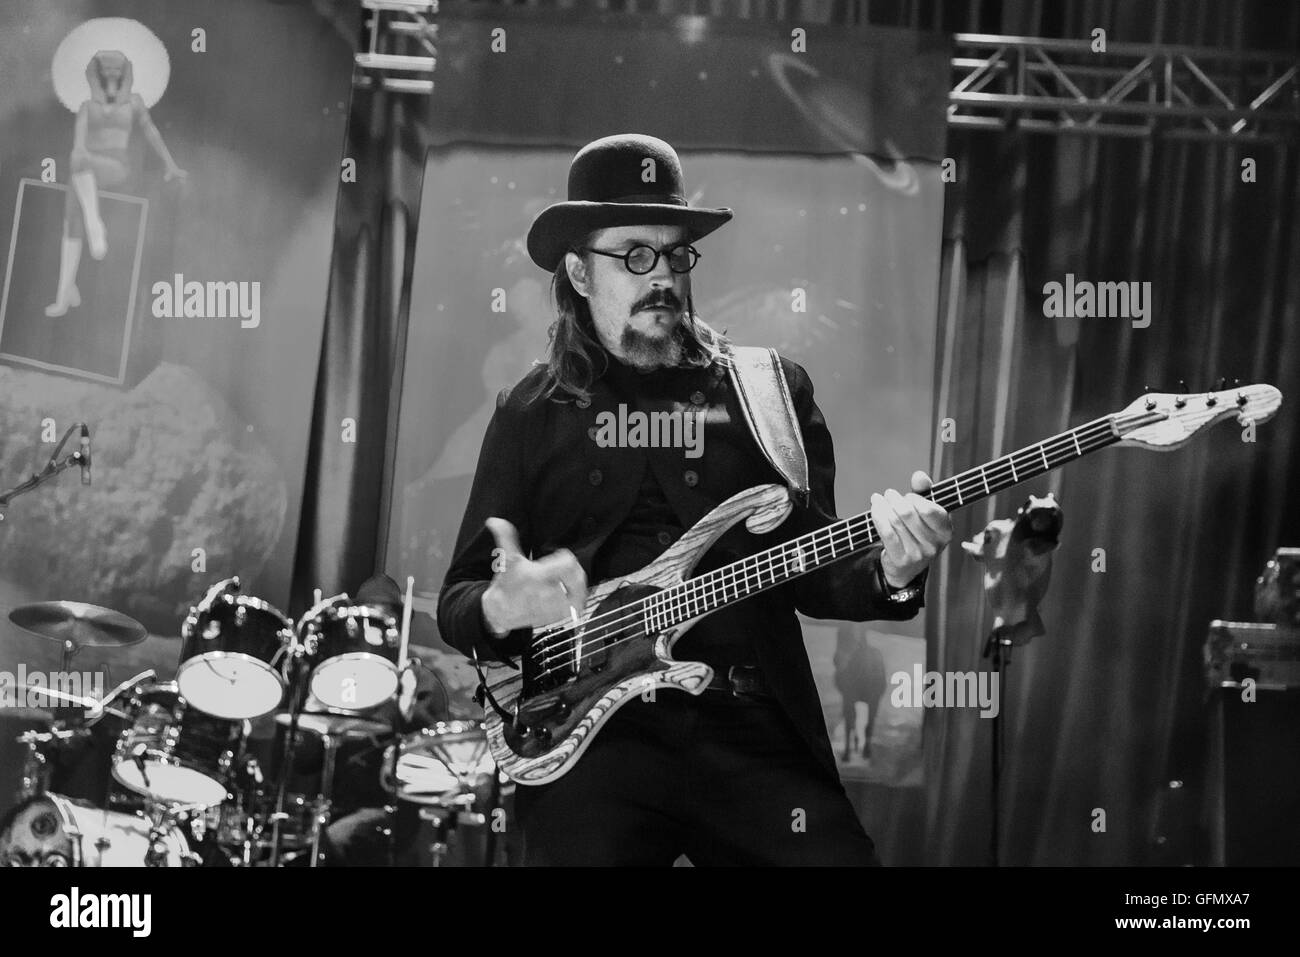 Las Vegas, Nevada, USA. 31st July, 2016. Les Claypool pictured as he performs with The Claypool Lennon Delirium at Brooklyn Bowl at The Linq in Las vegas, NV on July 31, 2016.  © MediaPunch Inc/Alamy Live News Stock Photo